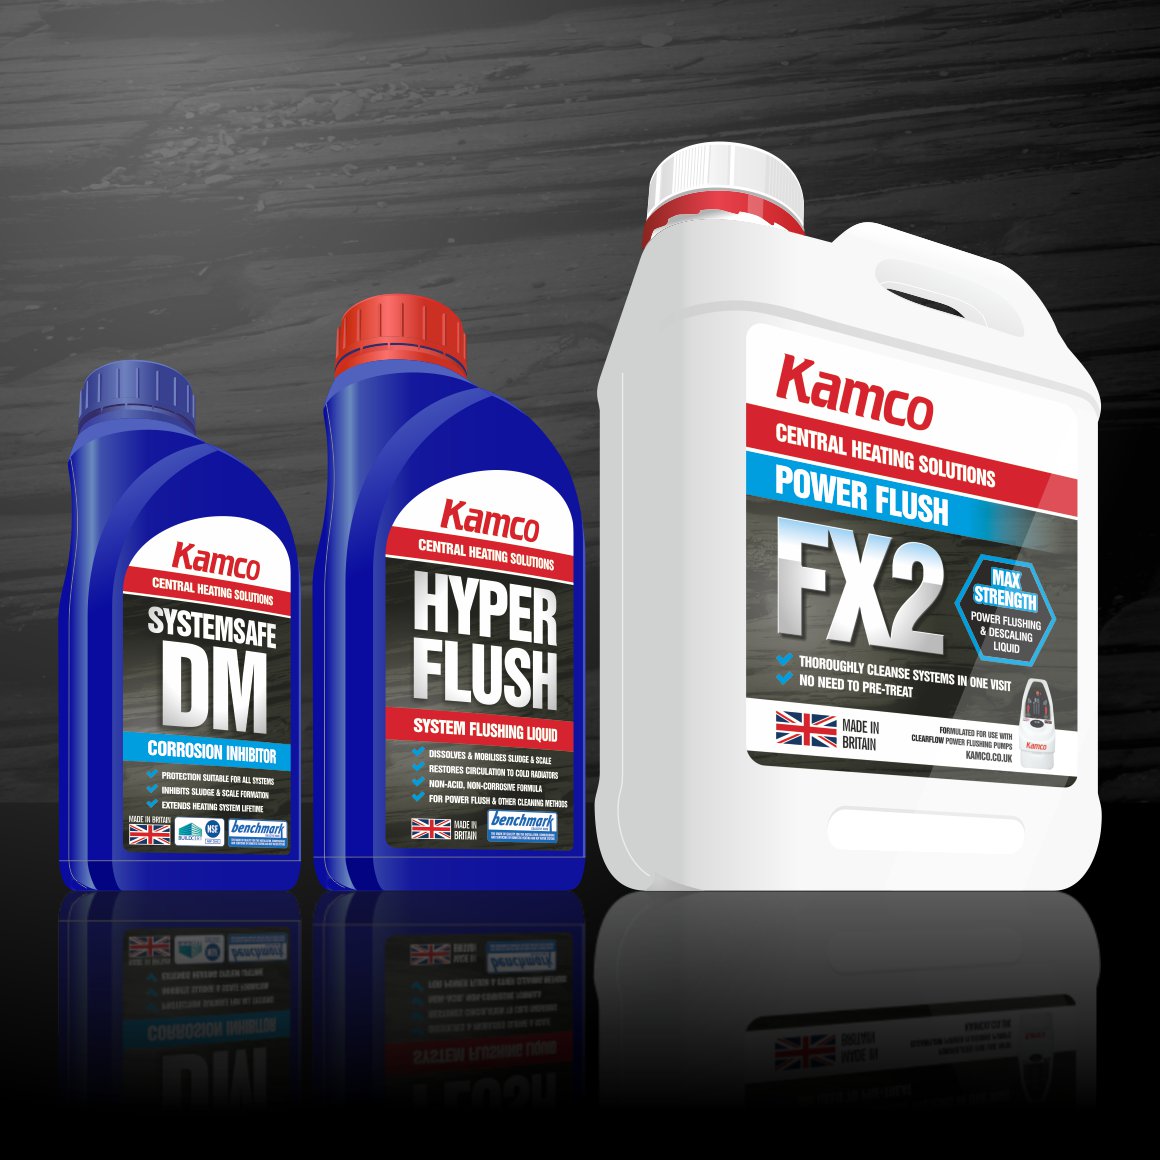 Kamco Power Flushing Chemicals